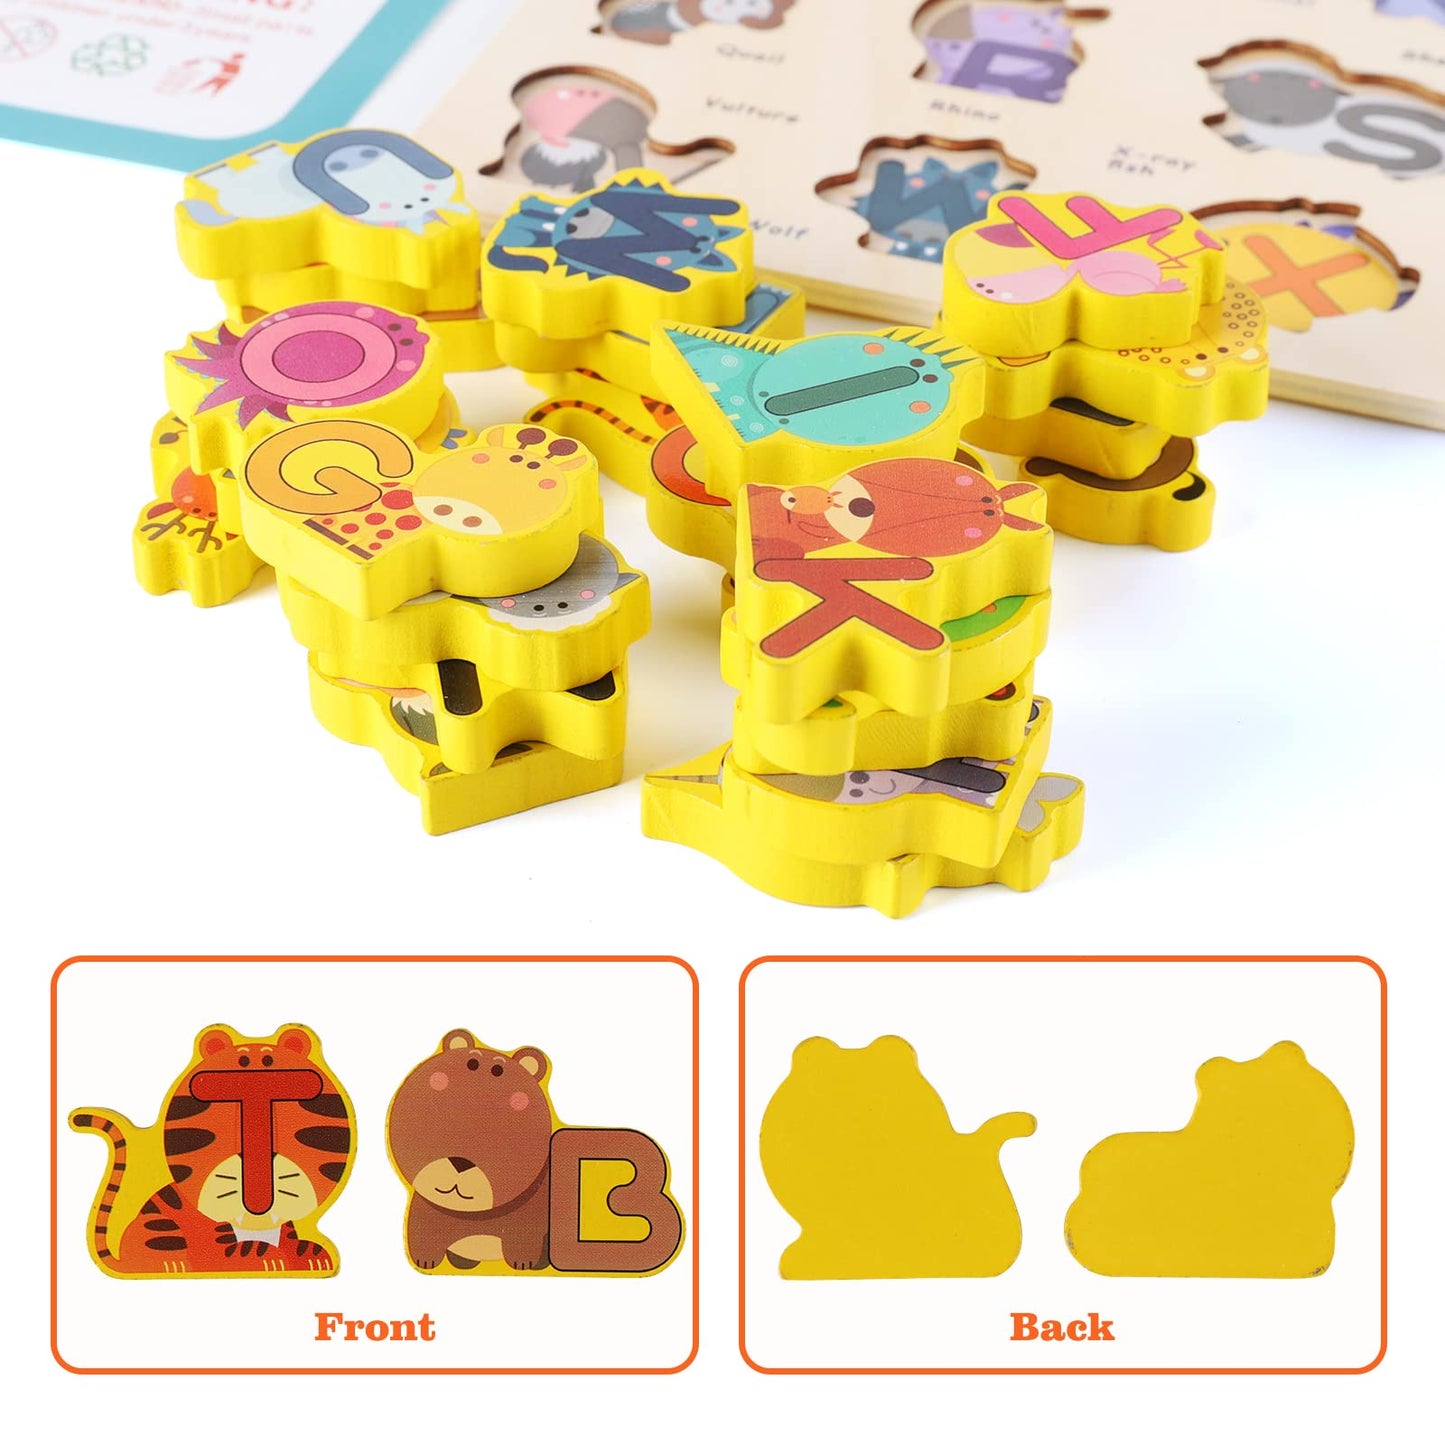 Wooden Peg Animal Alphabet Puzzle Game for Toddlers 2-6 Years Old, Alphabet Puzzles with Animal Shapes and Letters for Boys and Girls, Educational Alphabet Learning Gift Toys for Kids Ages 2 3 4 5 6